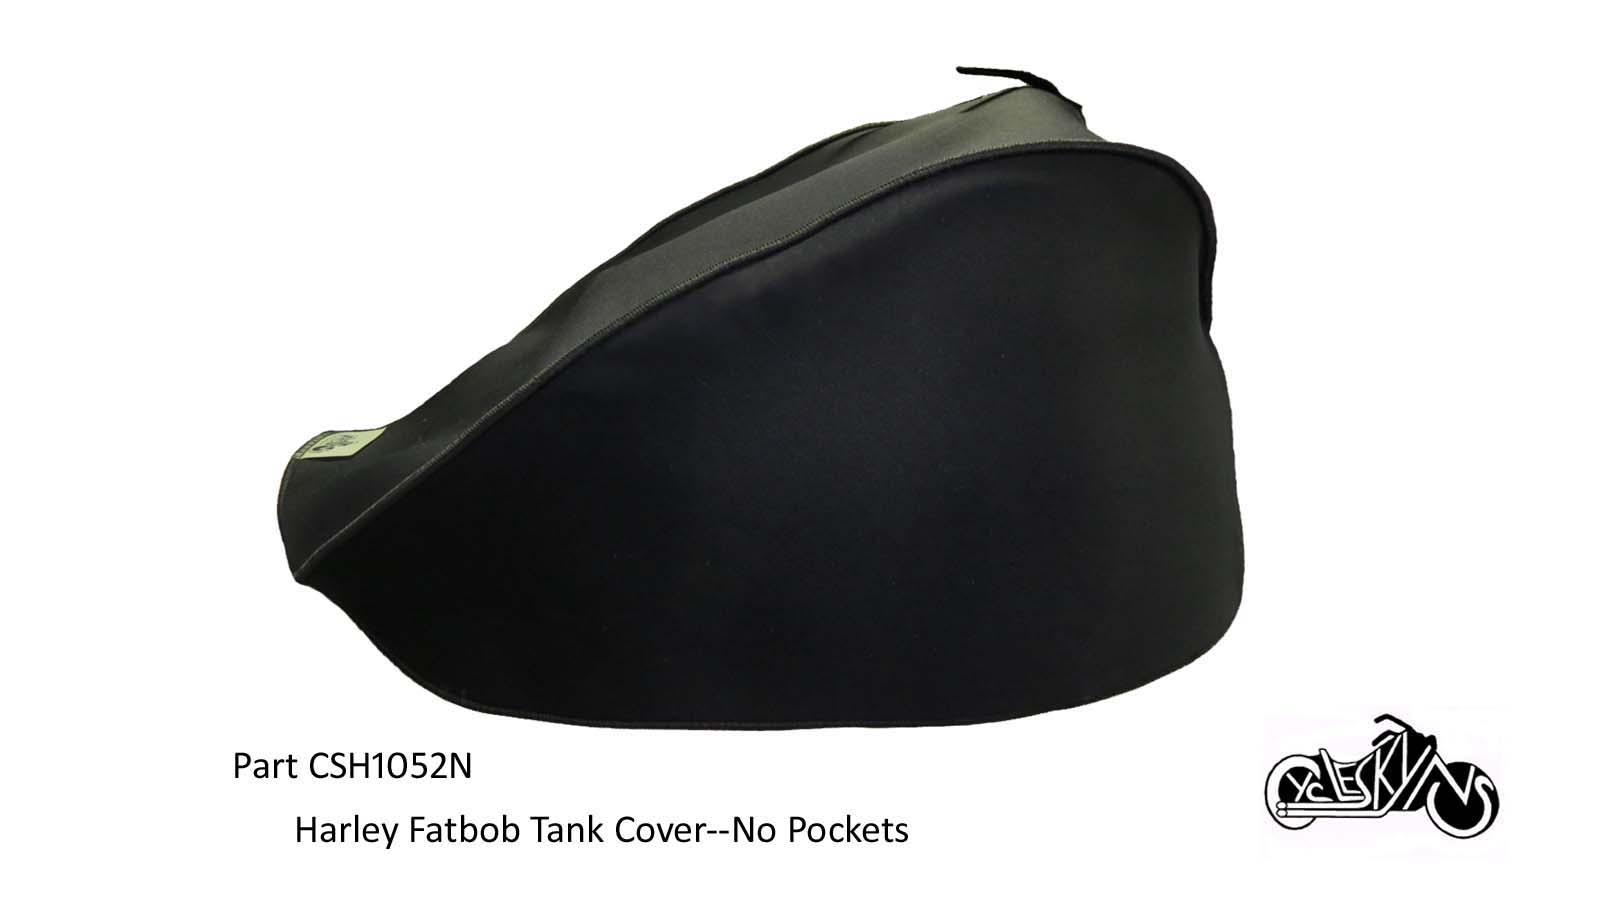 Neoprene Protective mechanic's Cover designed for the large Fat-bob Harley Davidson gas tank without top or side pockets